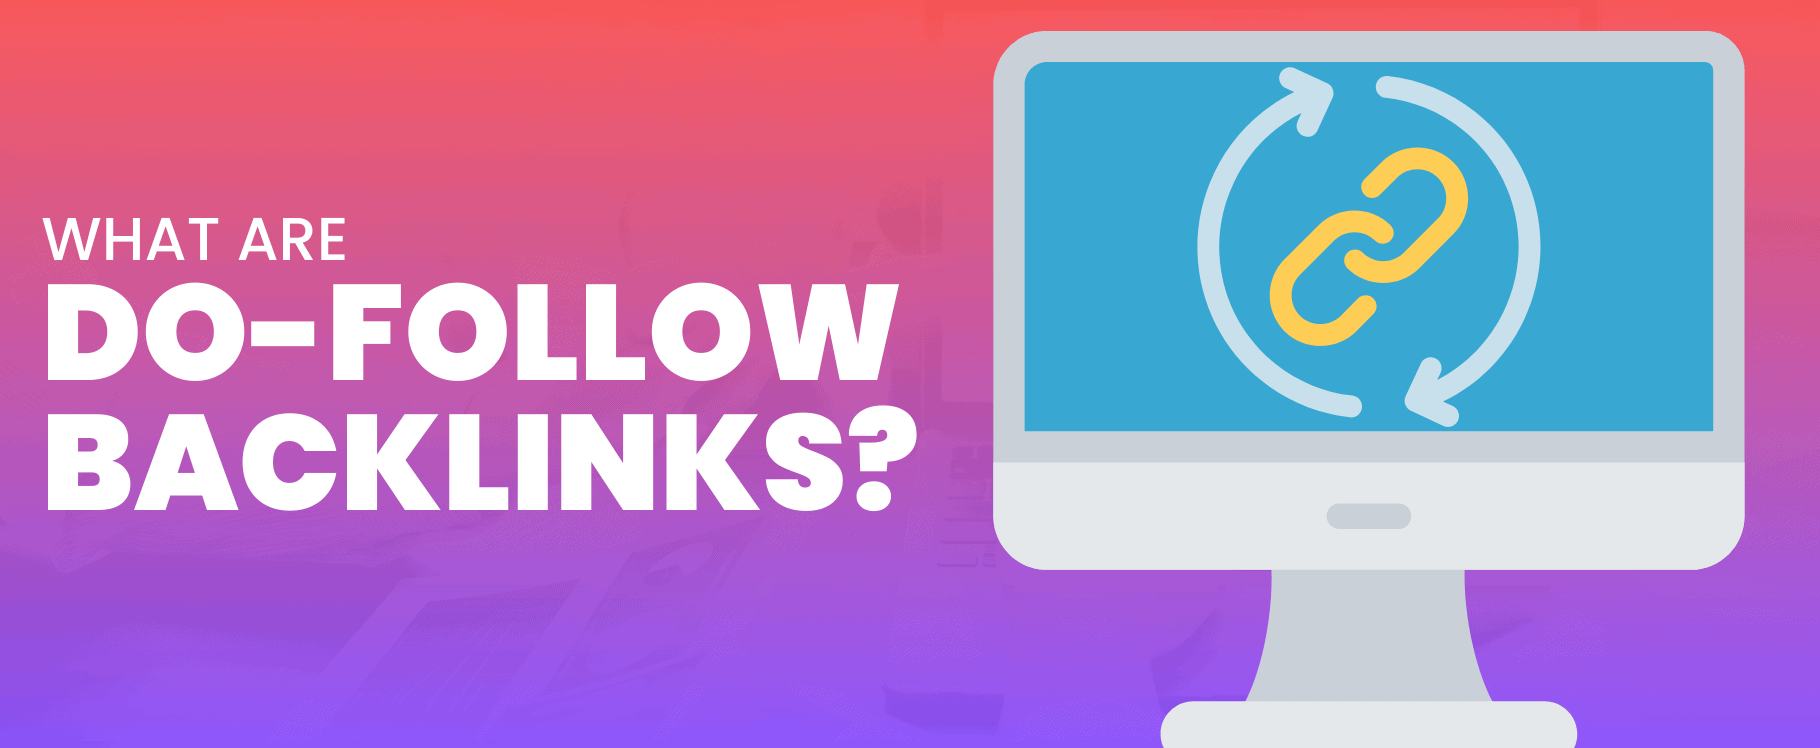 what are do-follow backlinks